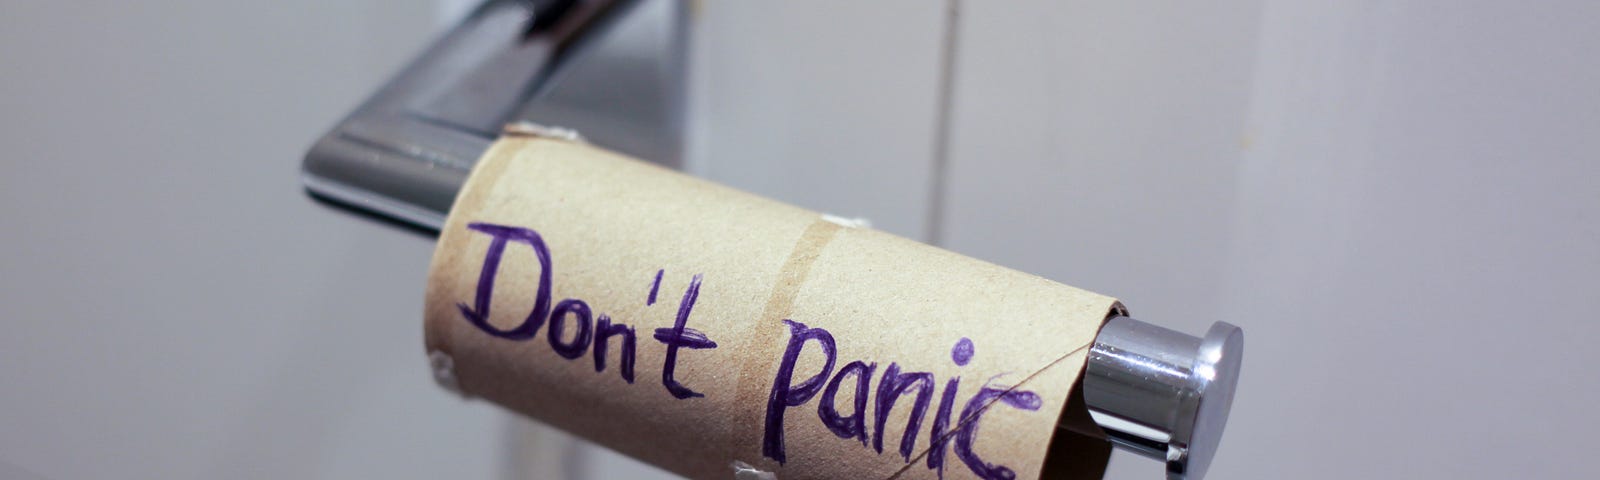 An empty roll of toilet paper with the message “Don’t panic.”